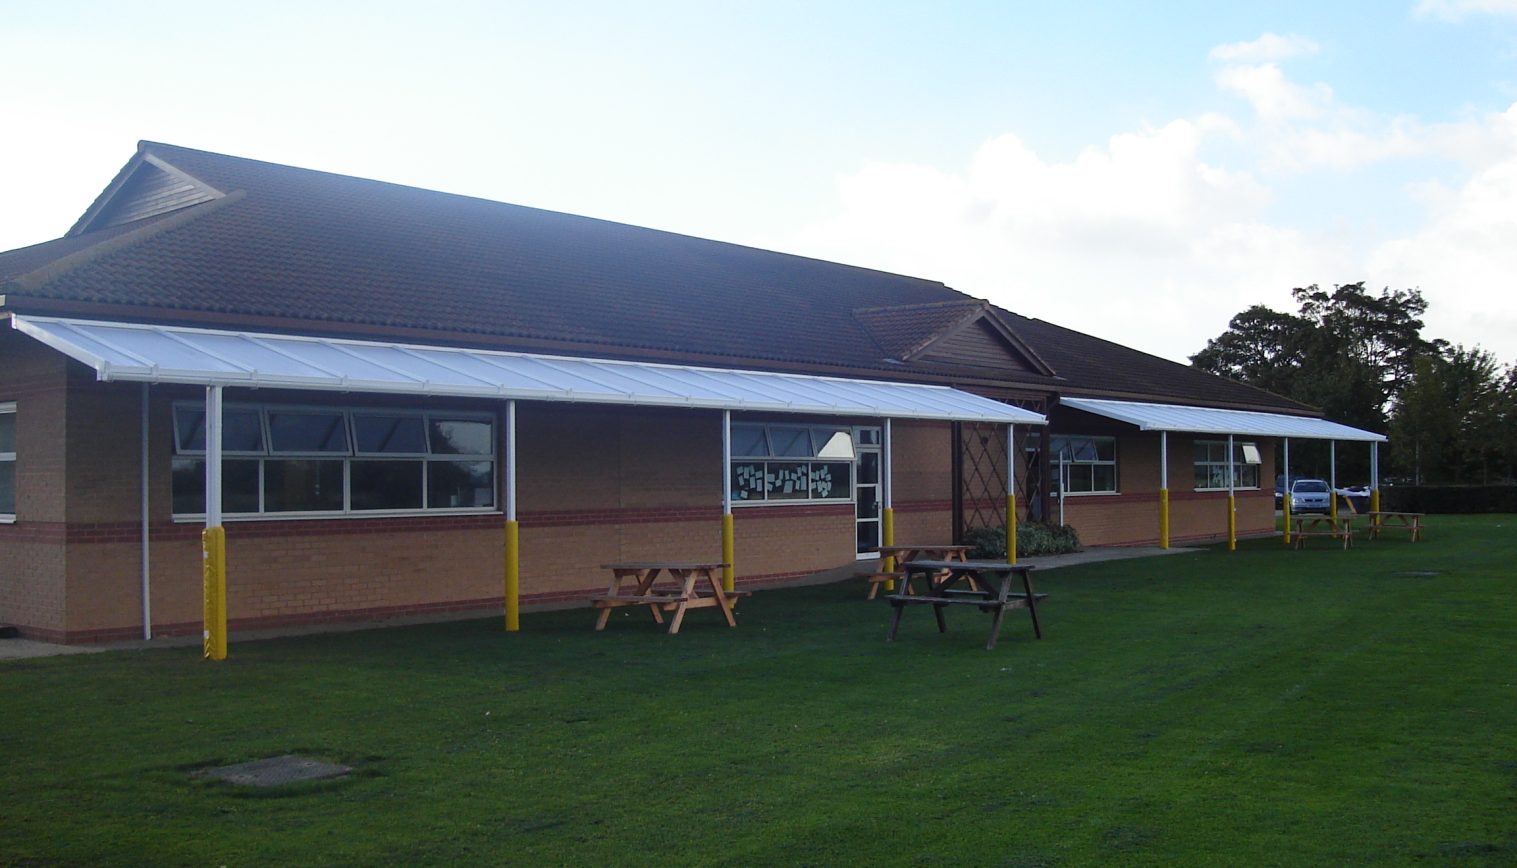 St Mary’s V C Lower School – Wall Mounted Canopies